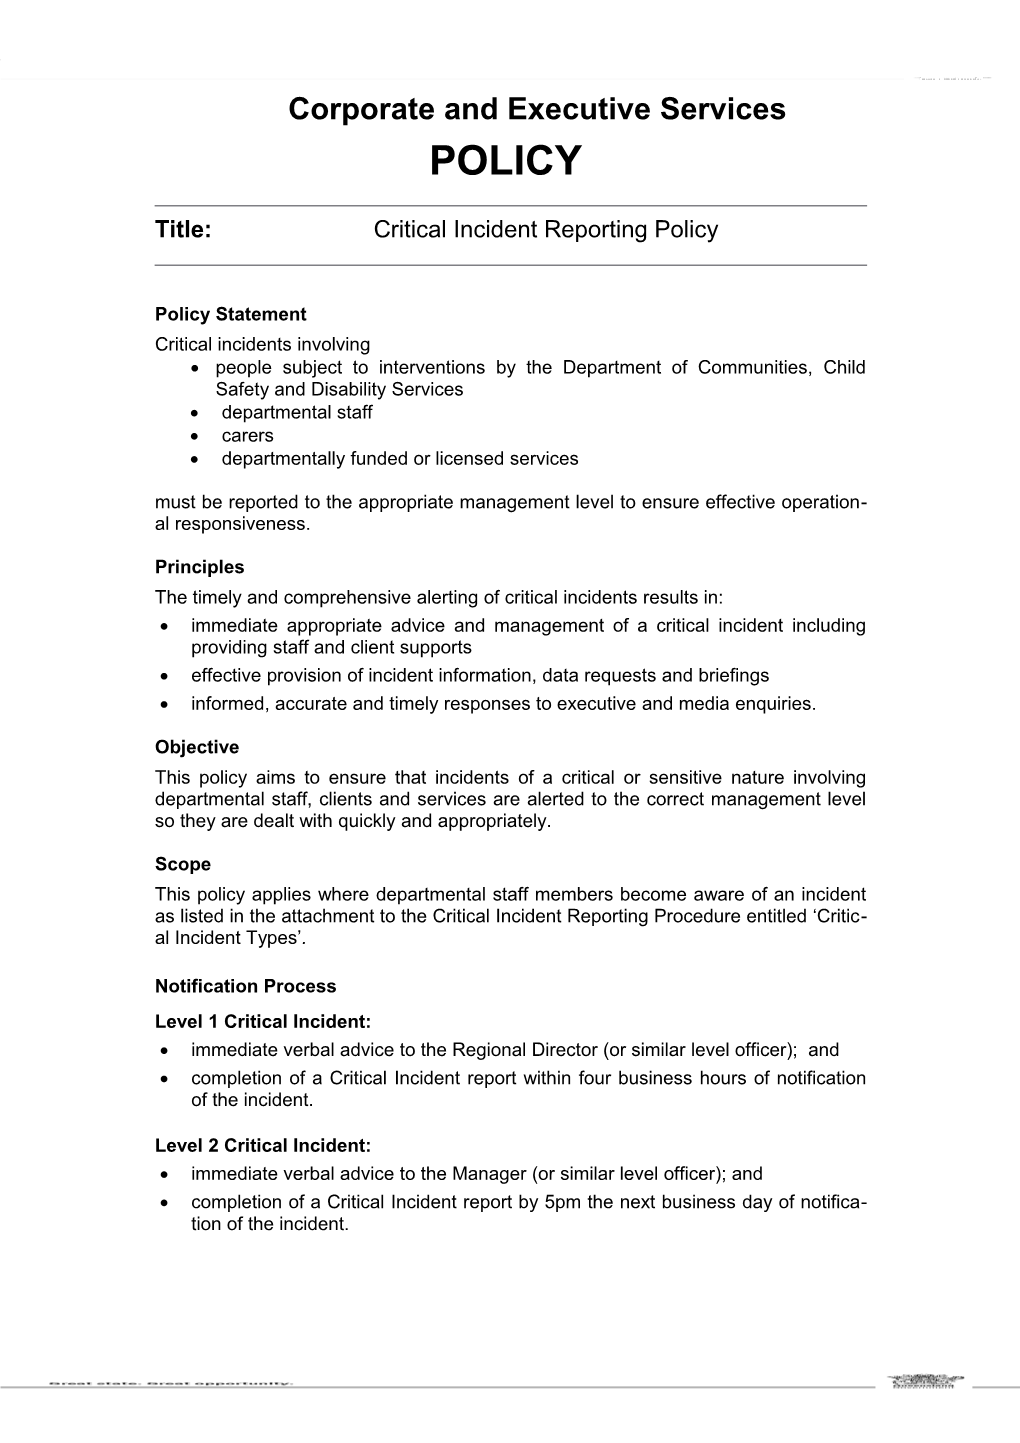 Critical Incident Reporting Policy